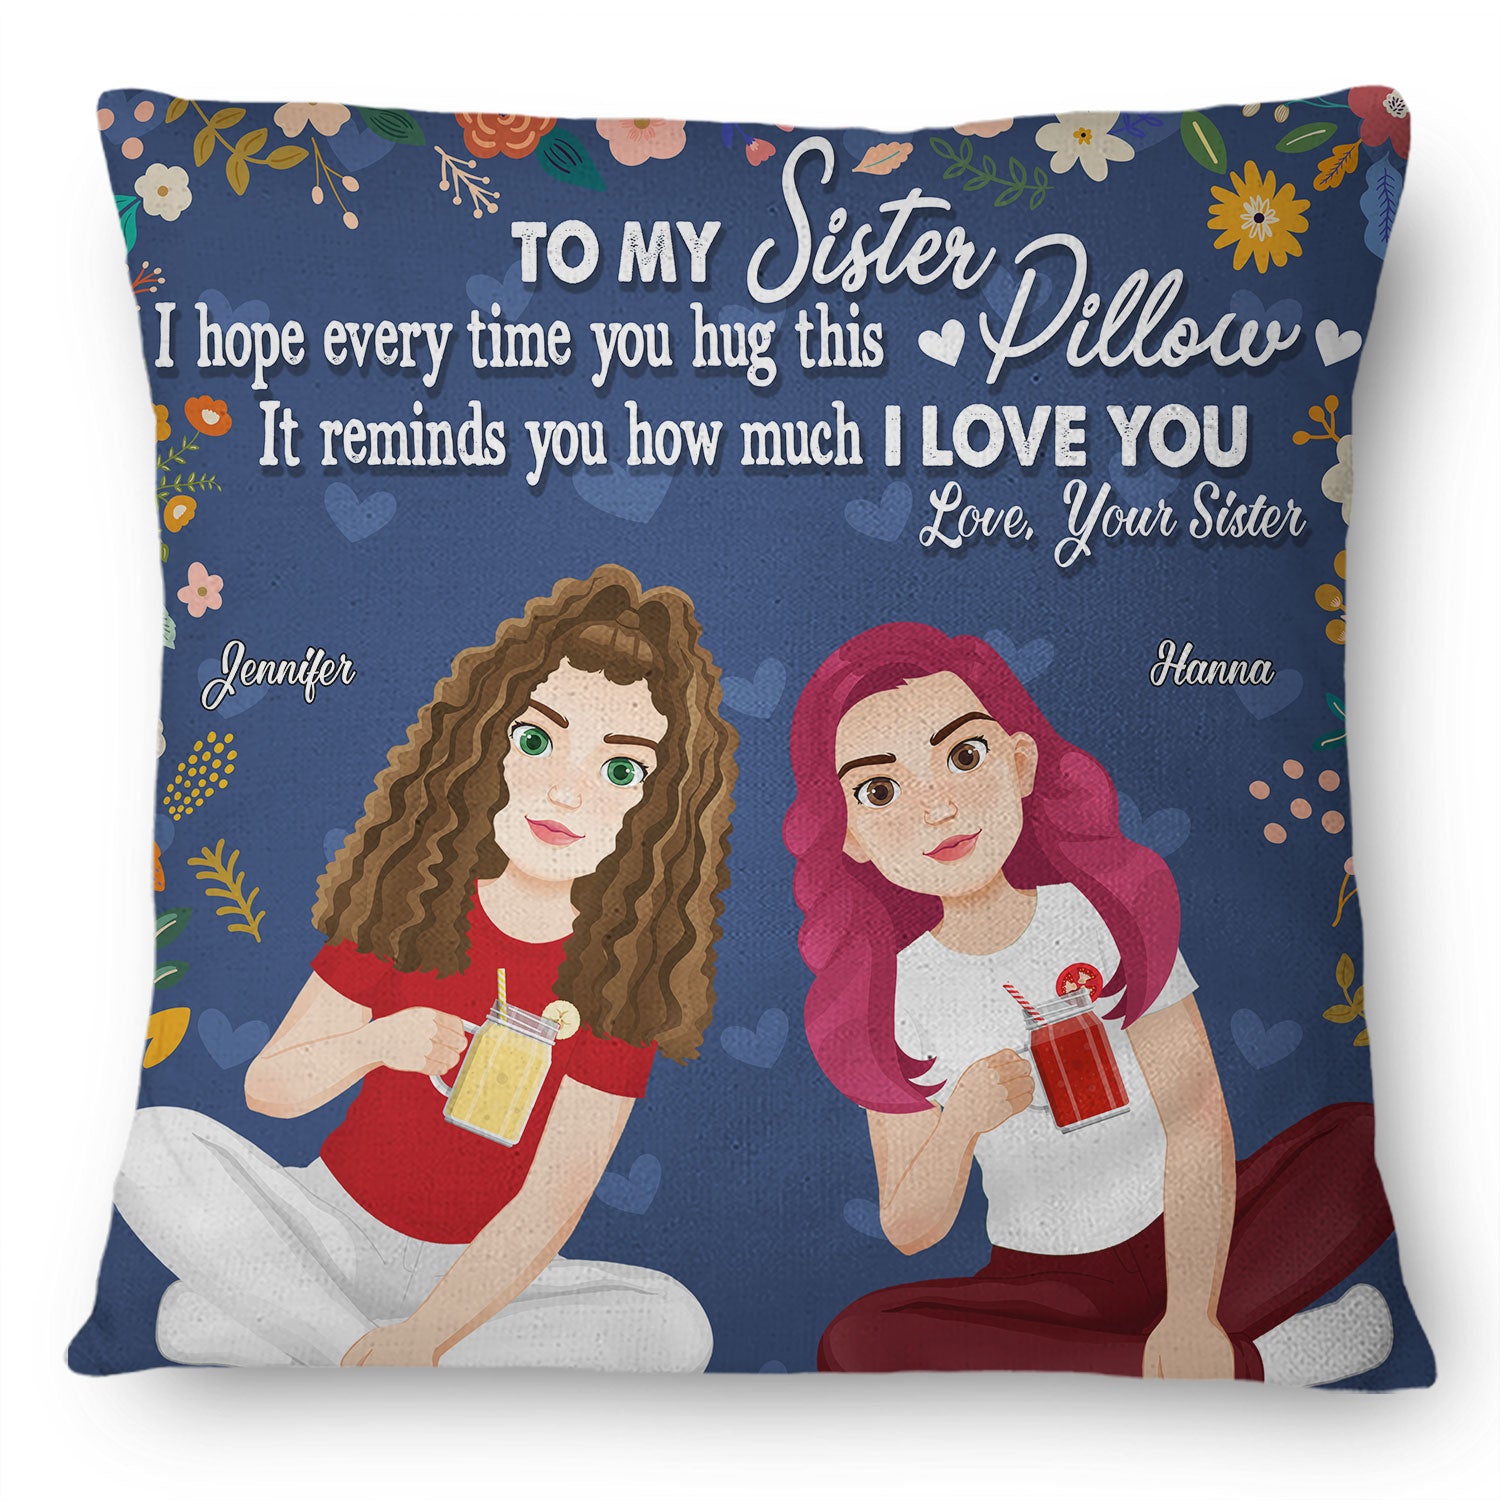 Remind How Much I Love You - Gift For Sisters - Personalized Pillow